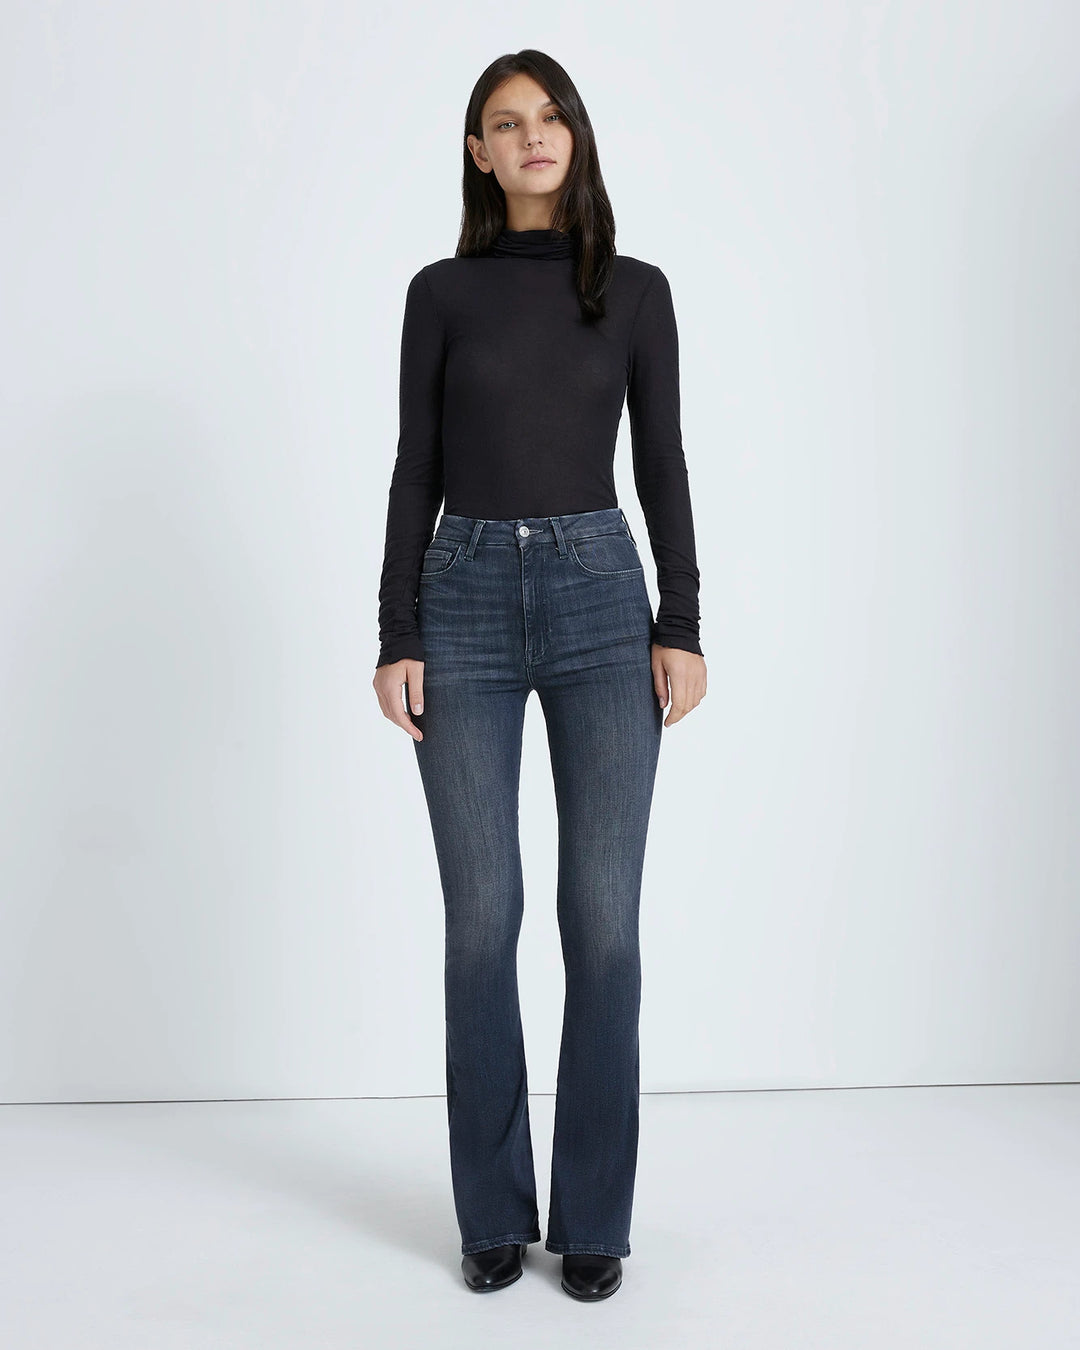 NO FILTER ULTRA HIGH RISE SKINNY BOOT (EDELWEISS) - 7 FOR ALL MANKIND